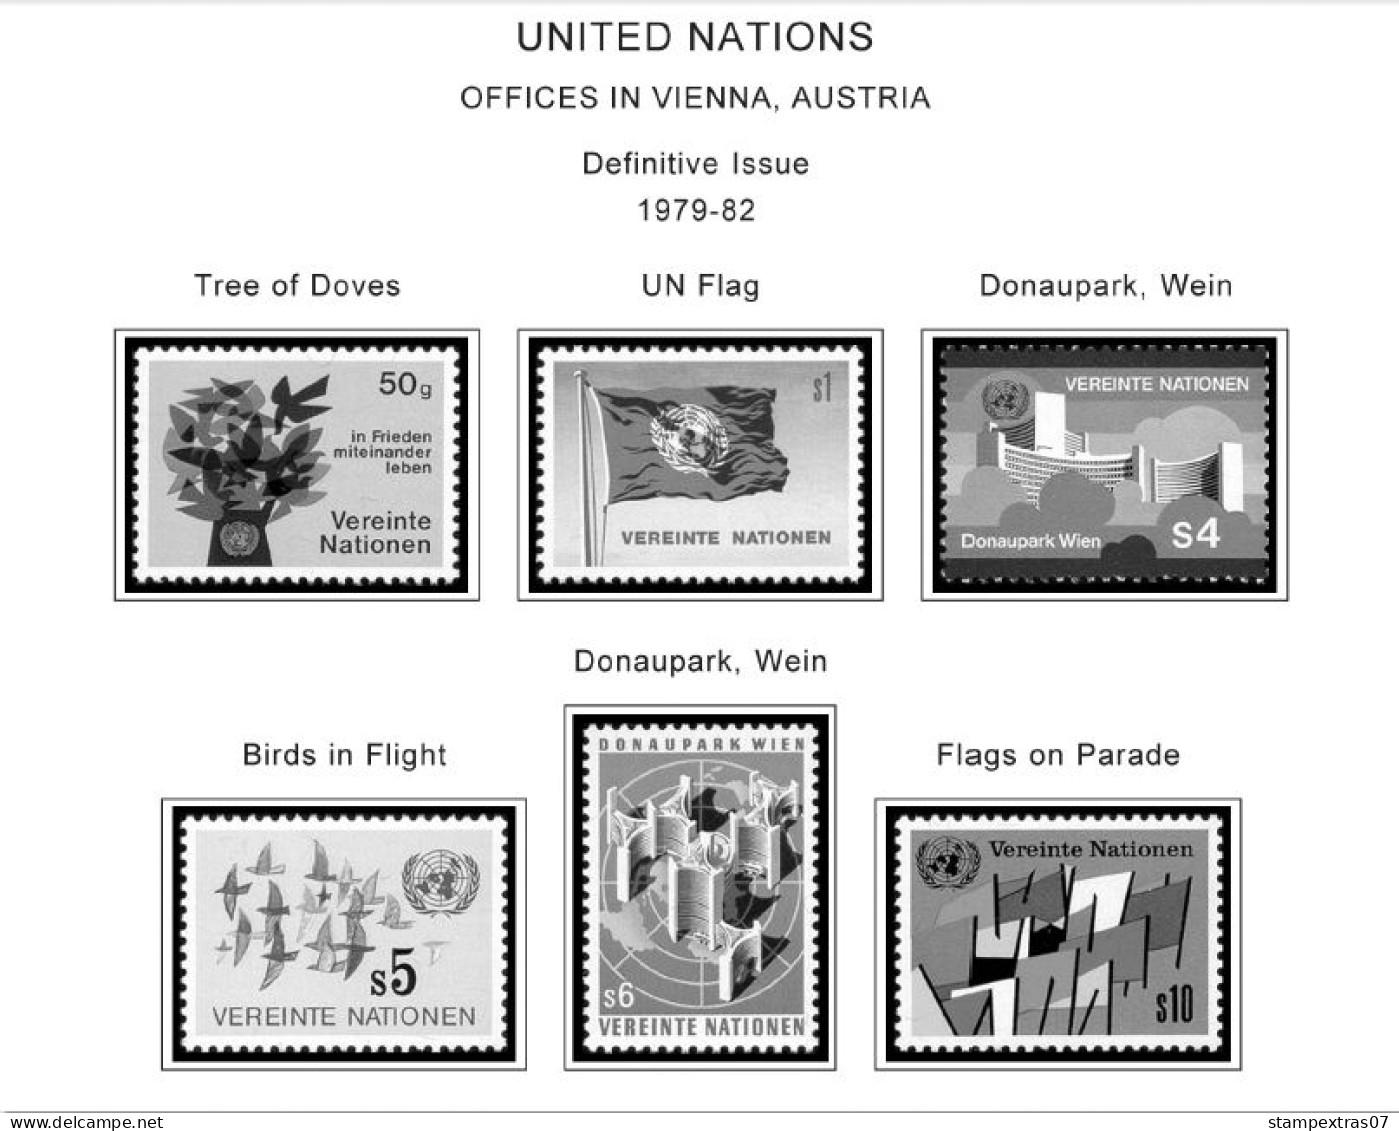 UNITED NATIONS - VIENNA 1979-2020 STAMP ALBUM PAGES (165 B&w Illustrated Pages) - Engels